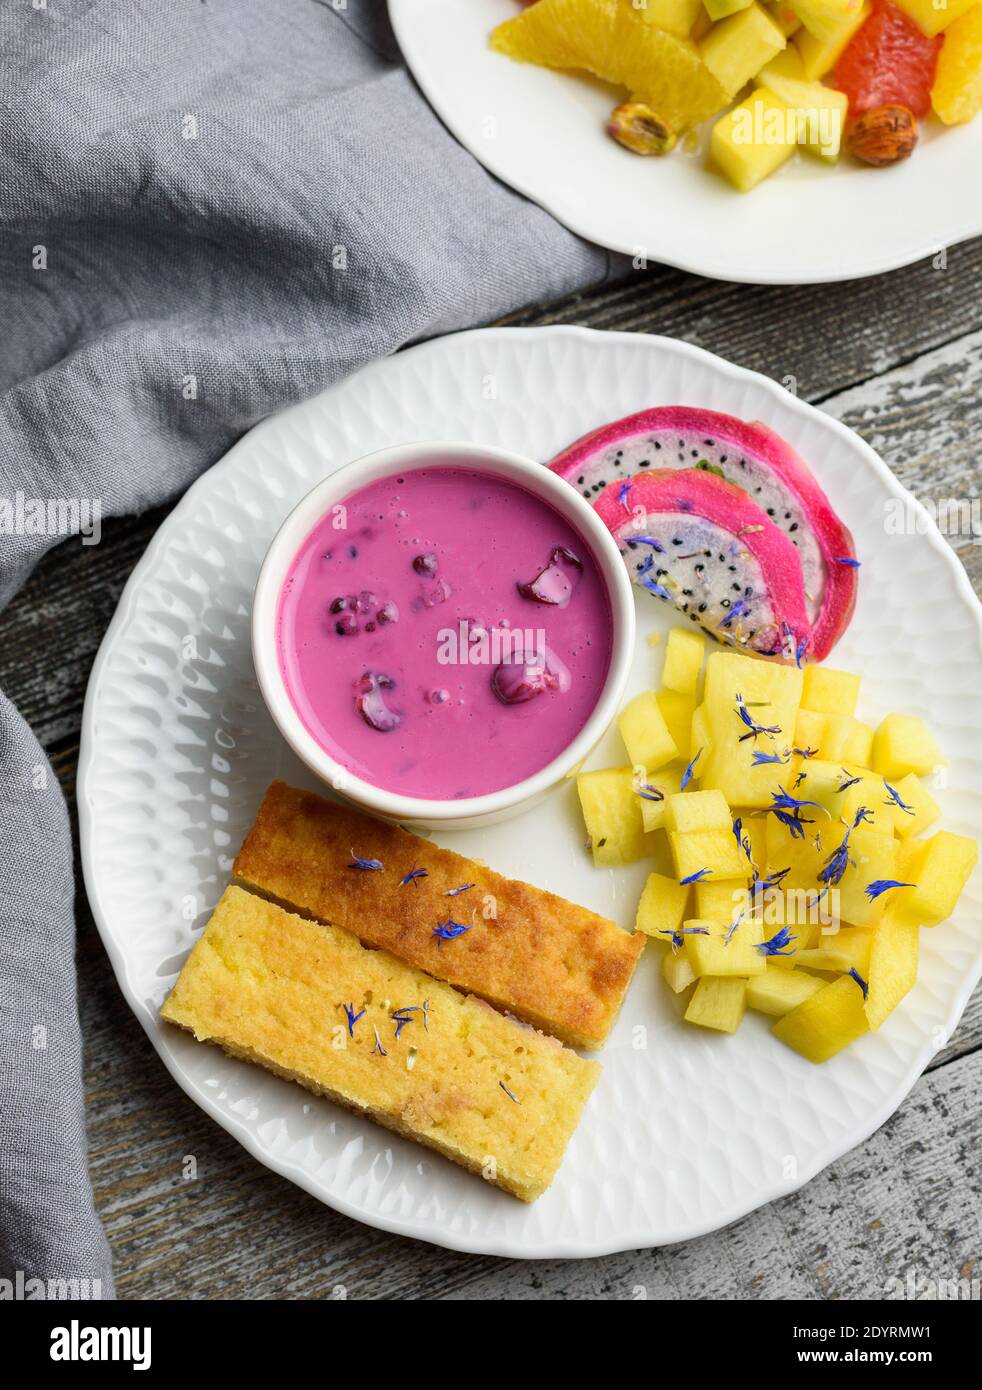 Mango bread with plant-based yogurt and fresh fruits, bright colors, colourful meal, flat lay Stock Photo